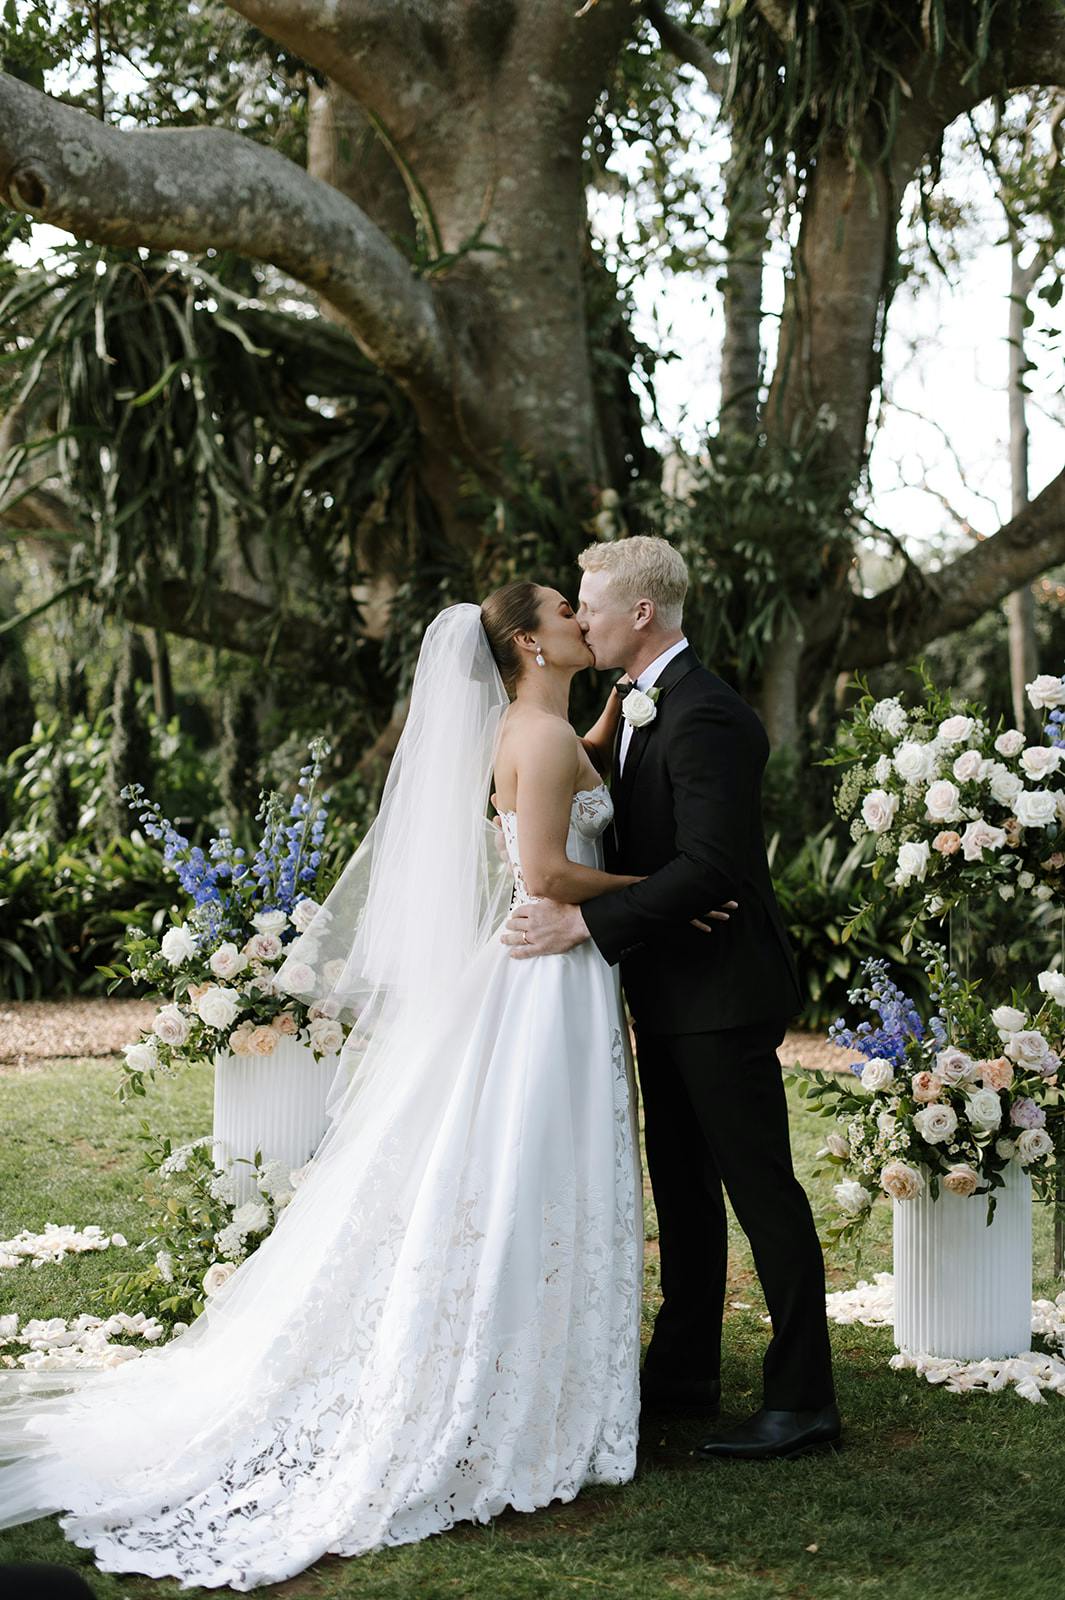 A bride and groom share a kiss in an outdoor wedding ceremony, standing in front of a large tree adorned with greenery. The bride is wearing a white, lace wedding gown with a veil, and the groom is in a black suit with a white boutonniere. Floral arrangements surround them.